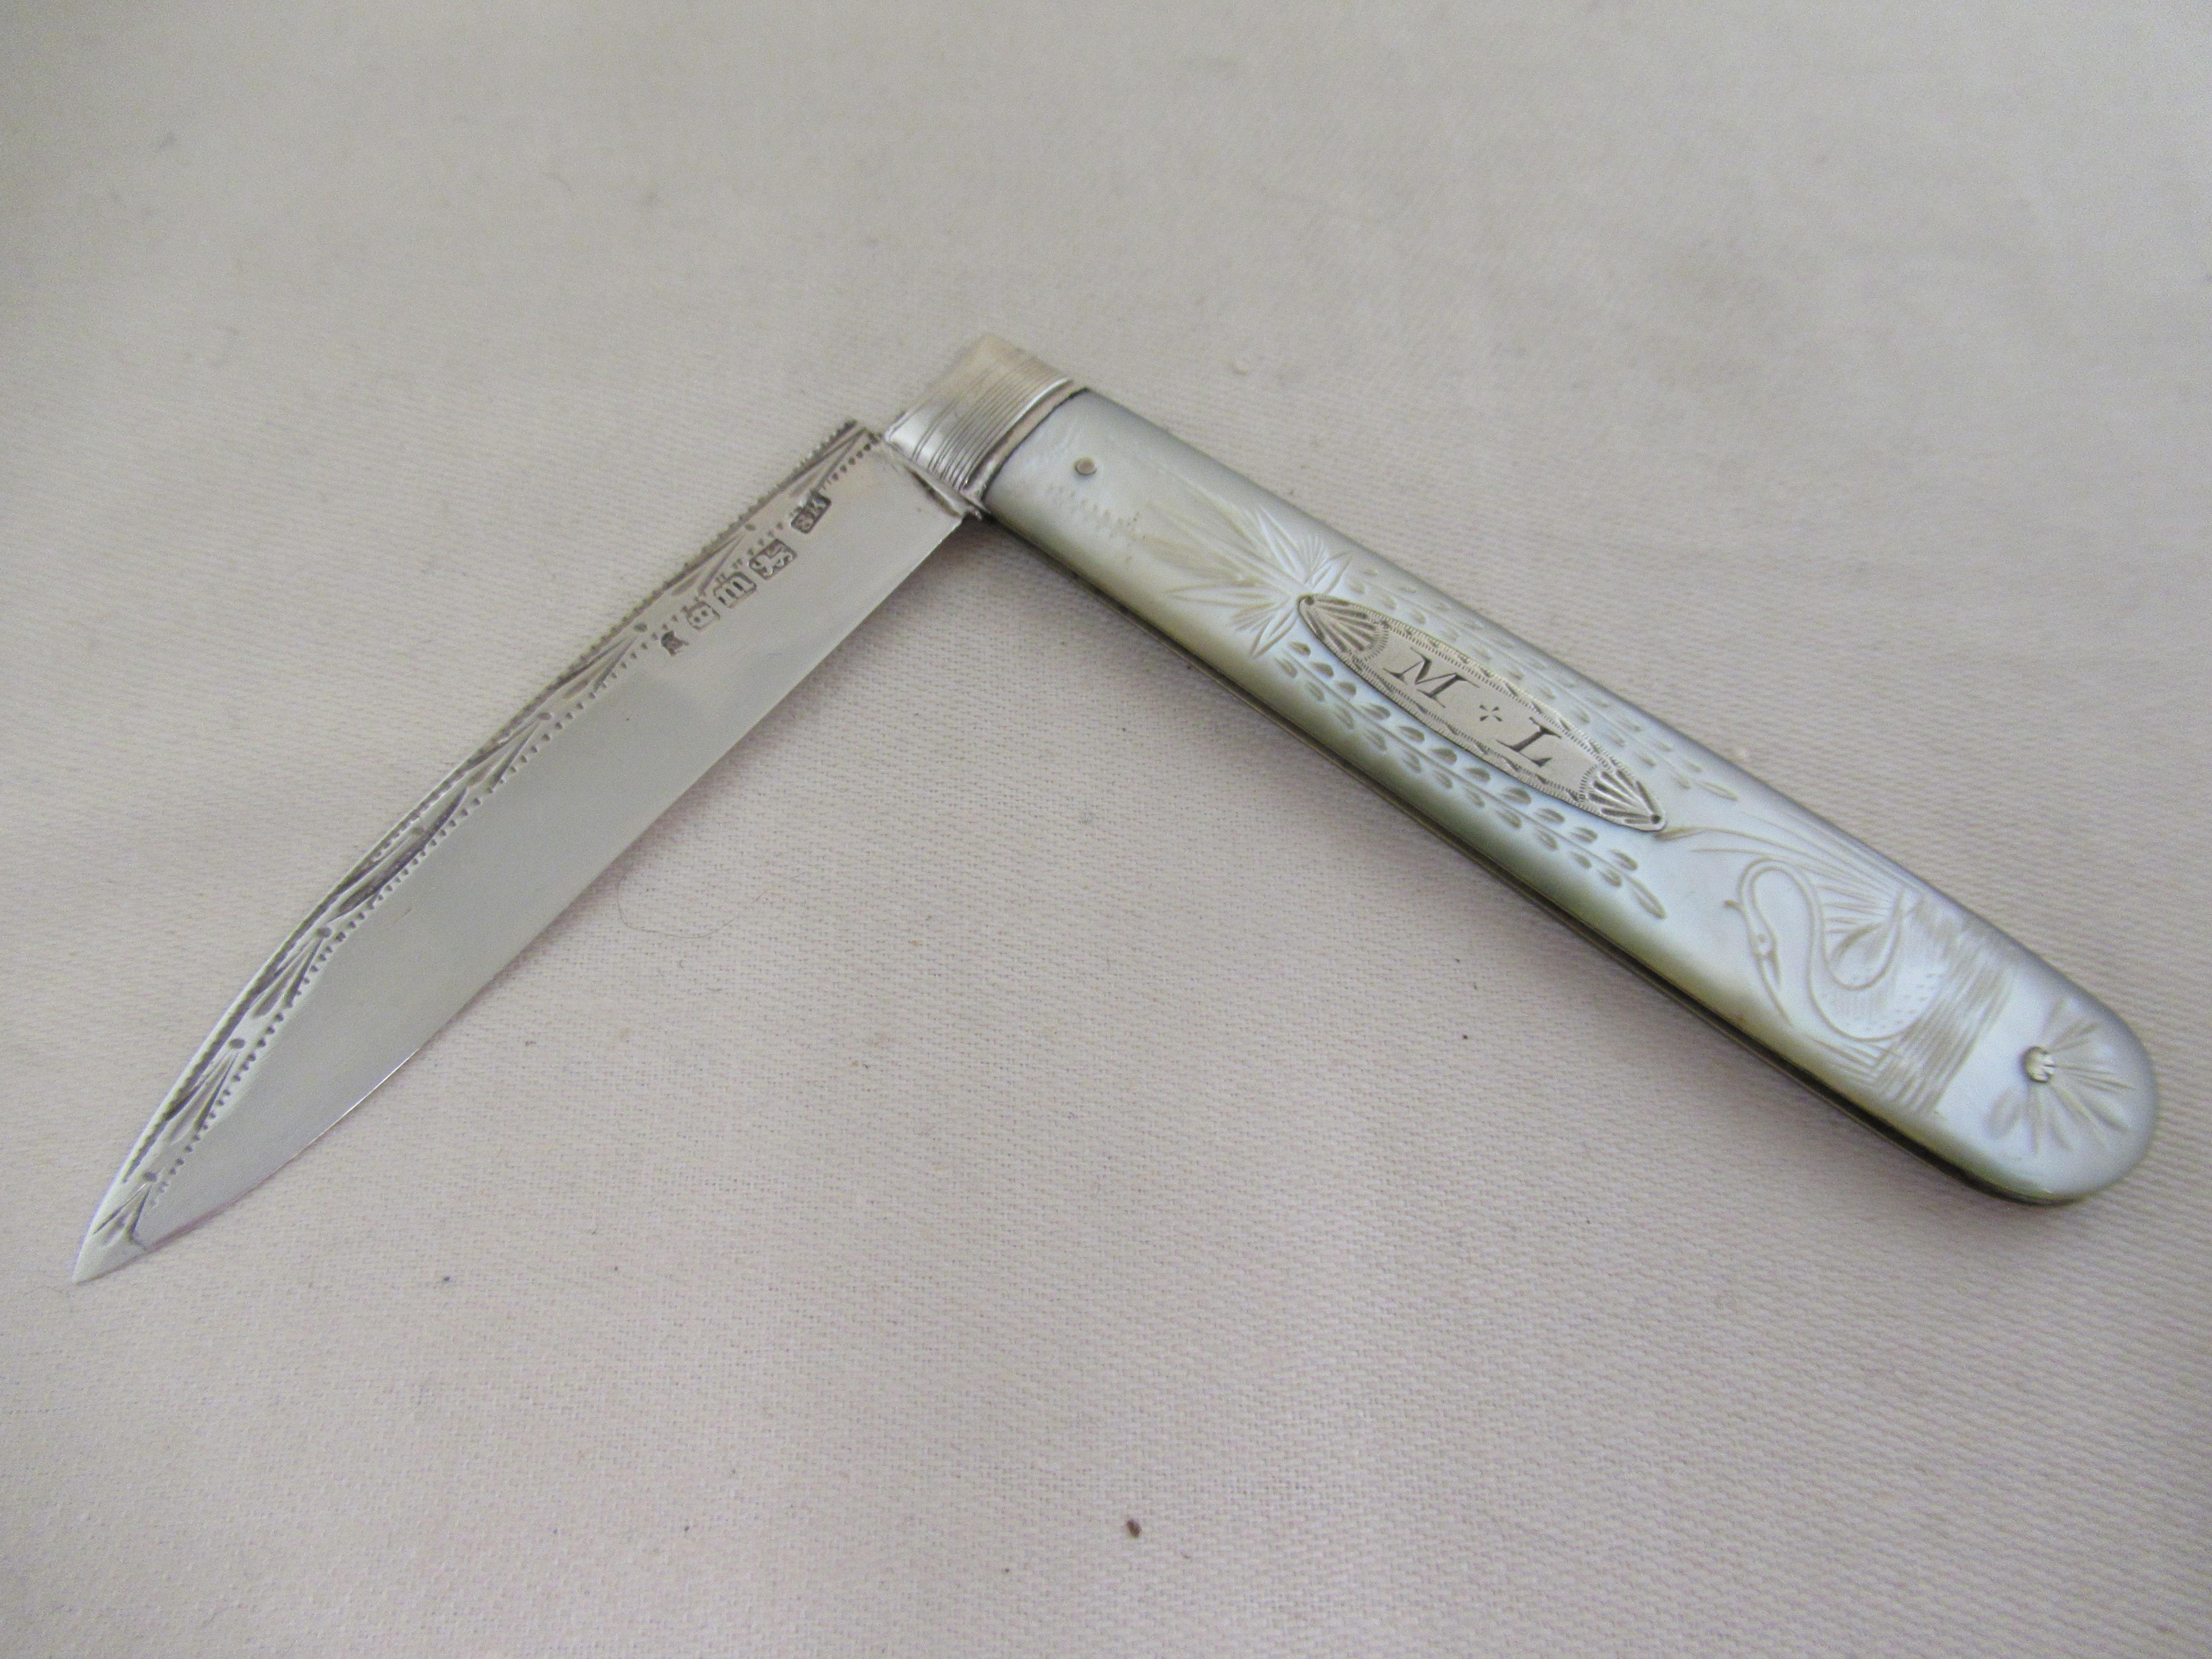 English sterling silver - a large FRUIT KNIFE, made in 1834
Full English hallmarks for Sheffield 1834 
The maker's mark is SK, which is probably Samuel Kirkby.
I have had `00s of fruit knives over the last 45 years, but this is the first time I